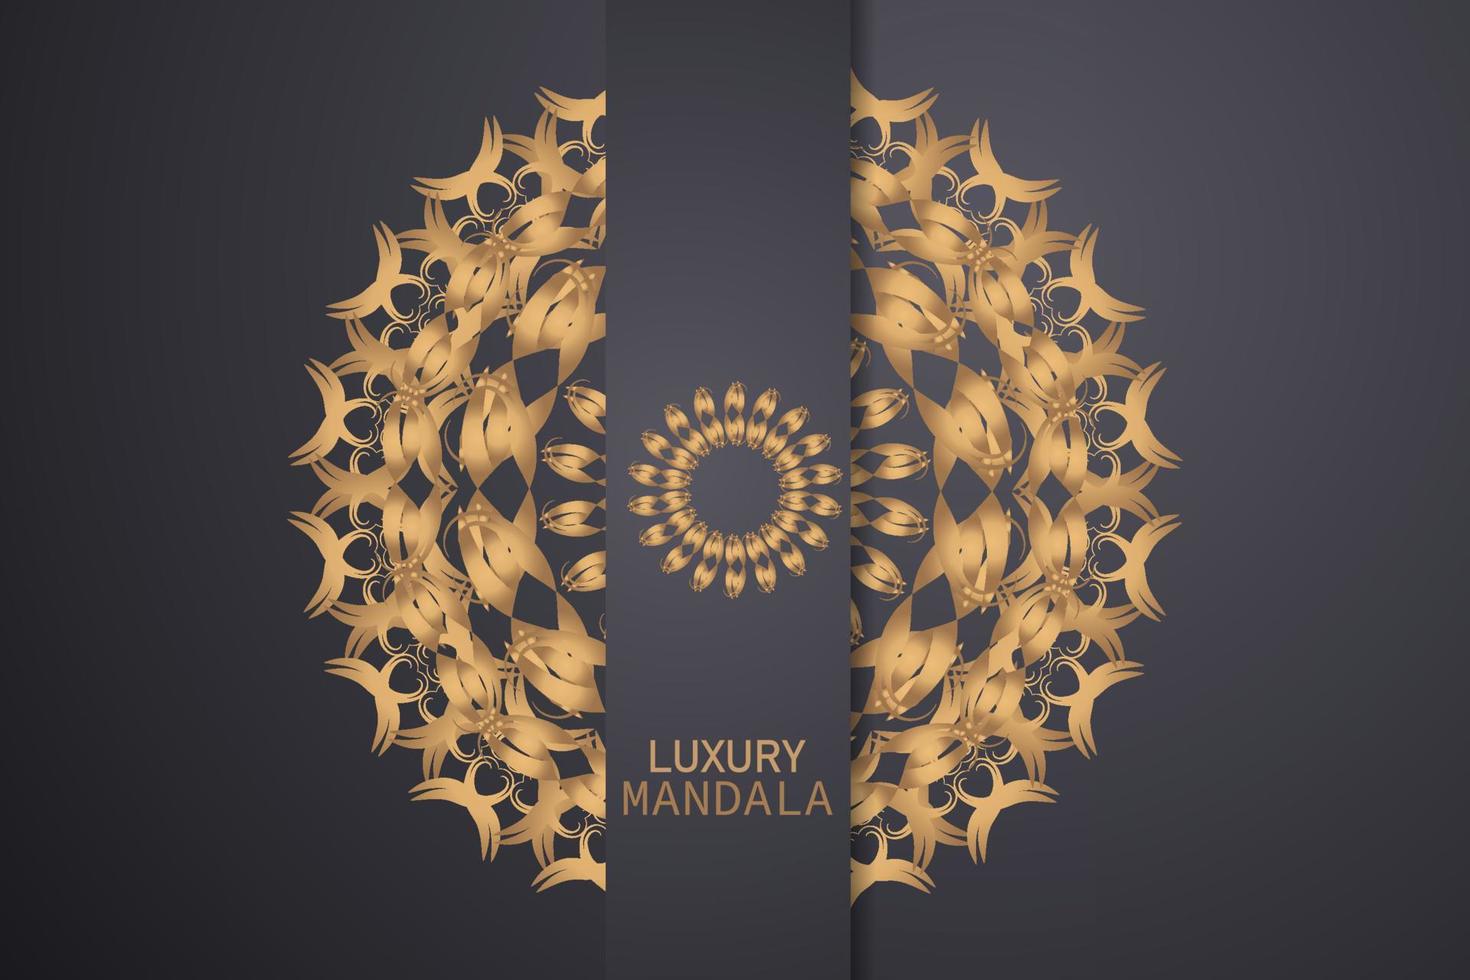 invitation card templates with gold patterned and crystals color luxury mandala background with golden arebesque pattern arabic islamic east style. ramadan style decorative mandala, flyer banner vector